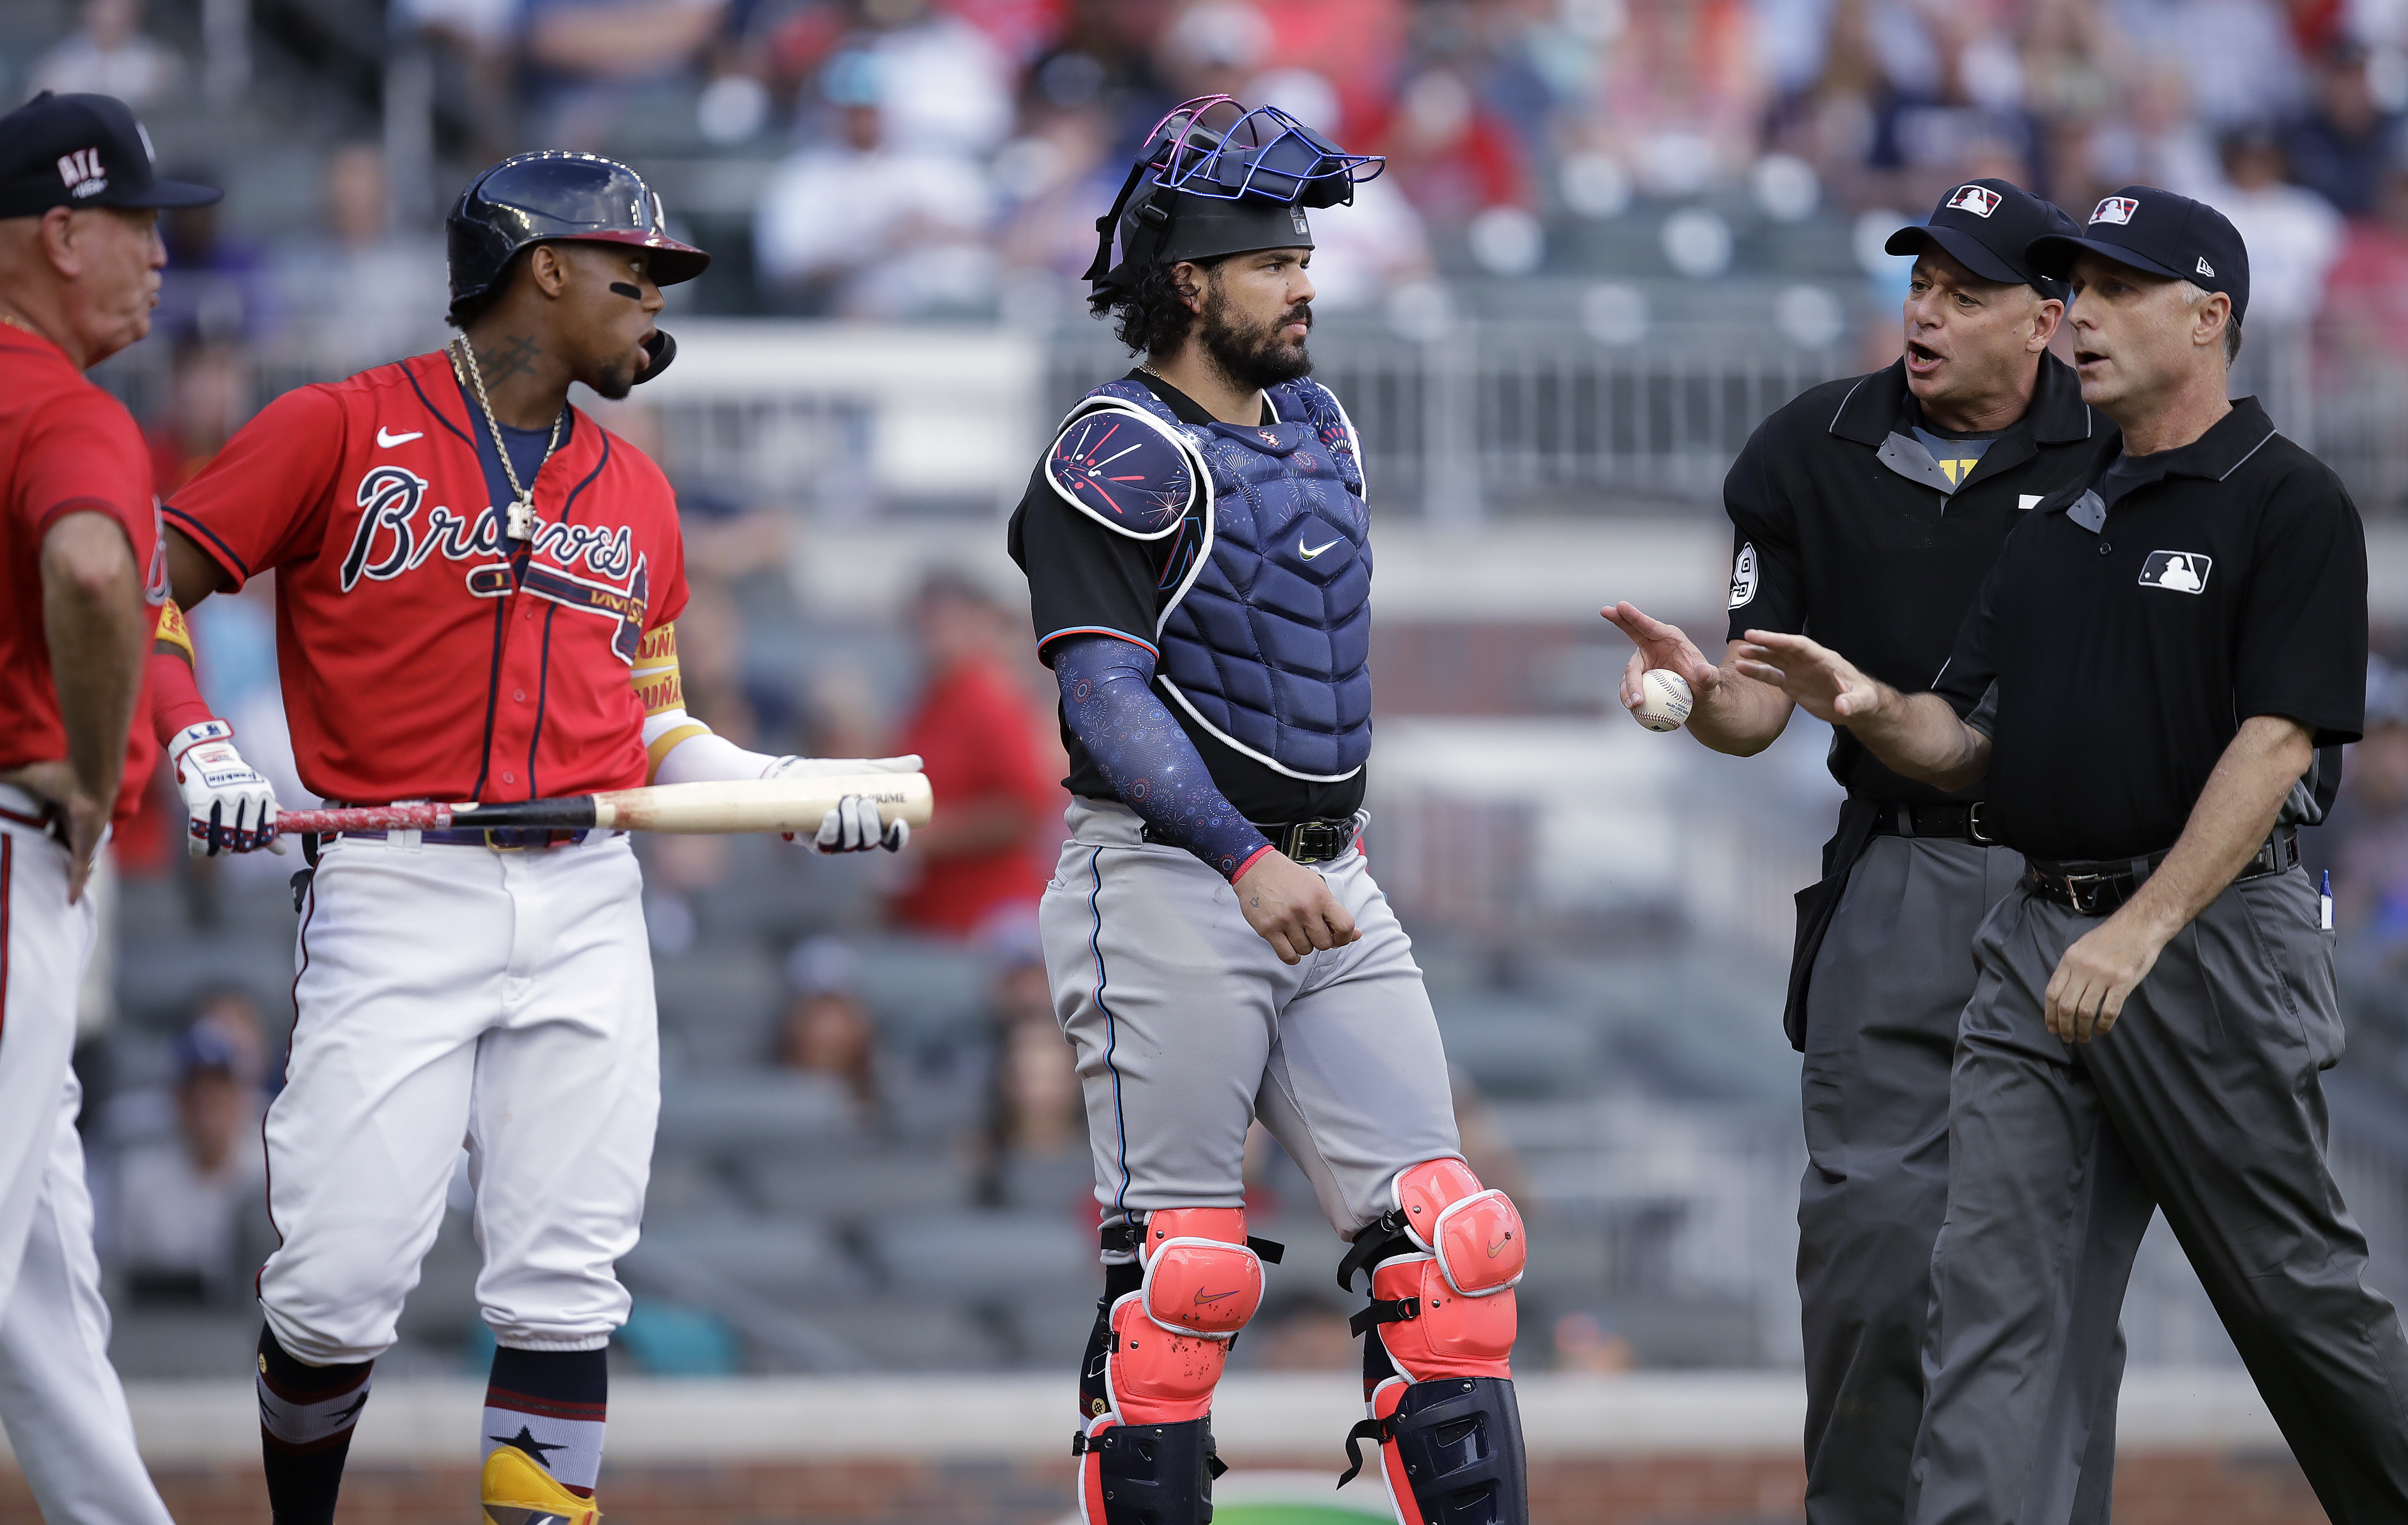 Fried's pinch-hit single lifts Braves past Marlins 8-7 in 10